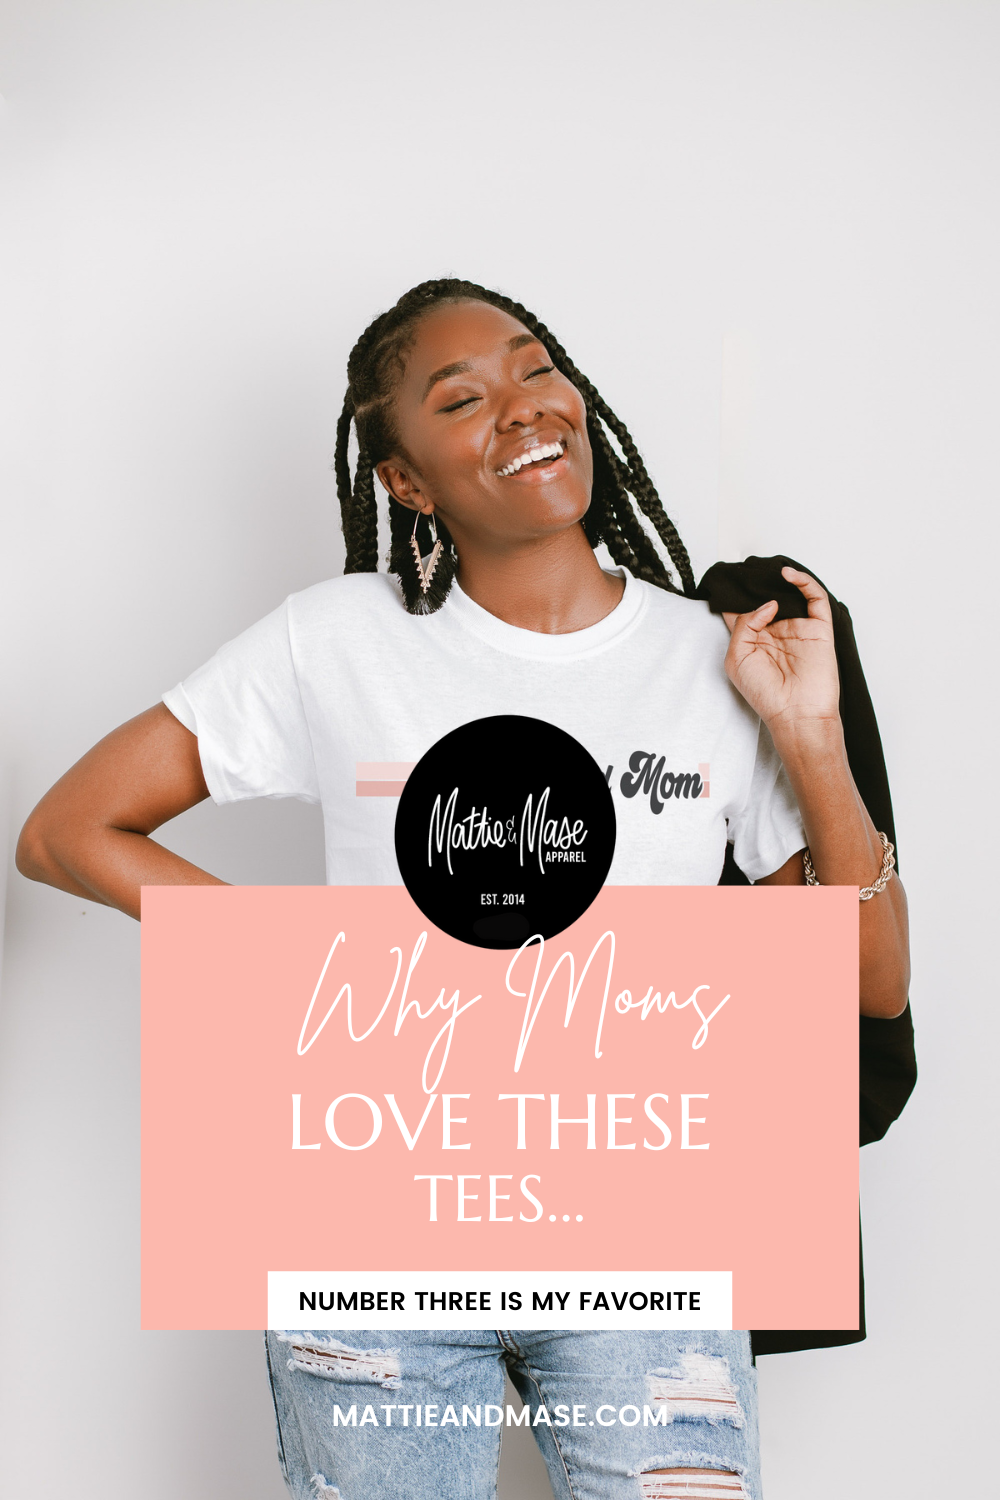 "Why Moms Love Mattie and Mase Tees: A Hilarious Take on Mom Life"